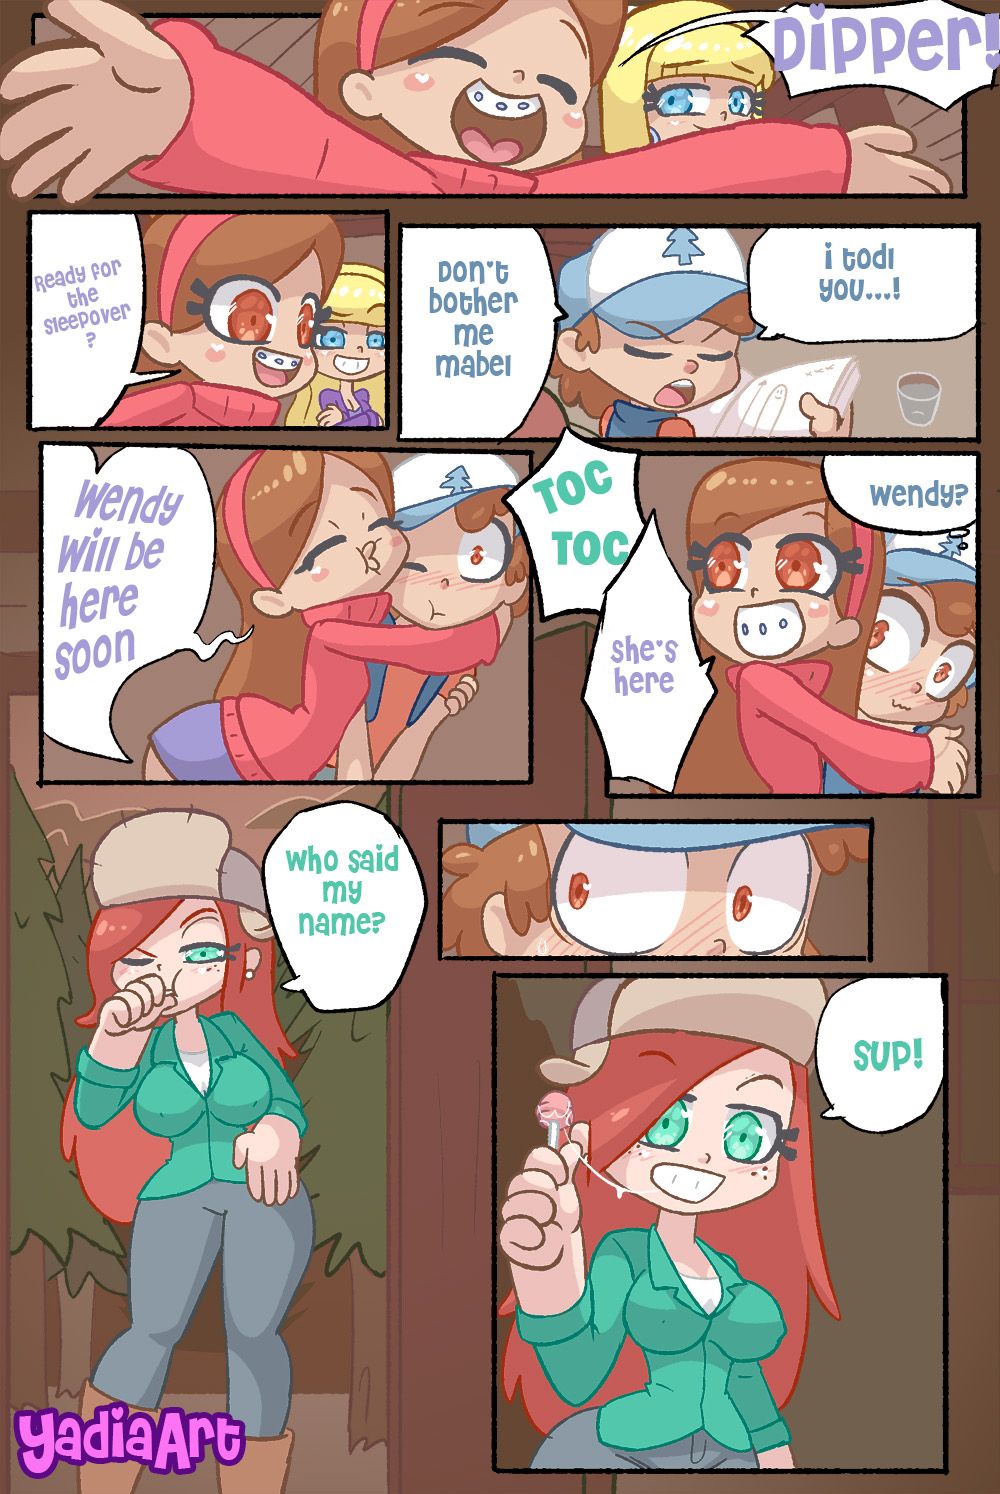 Pacifia Mable Gravity Falls Porn - Sleepover (Gravity Falls) YadiaArt - Comics Army